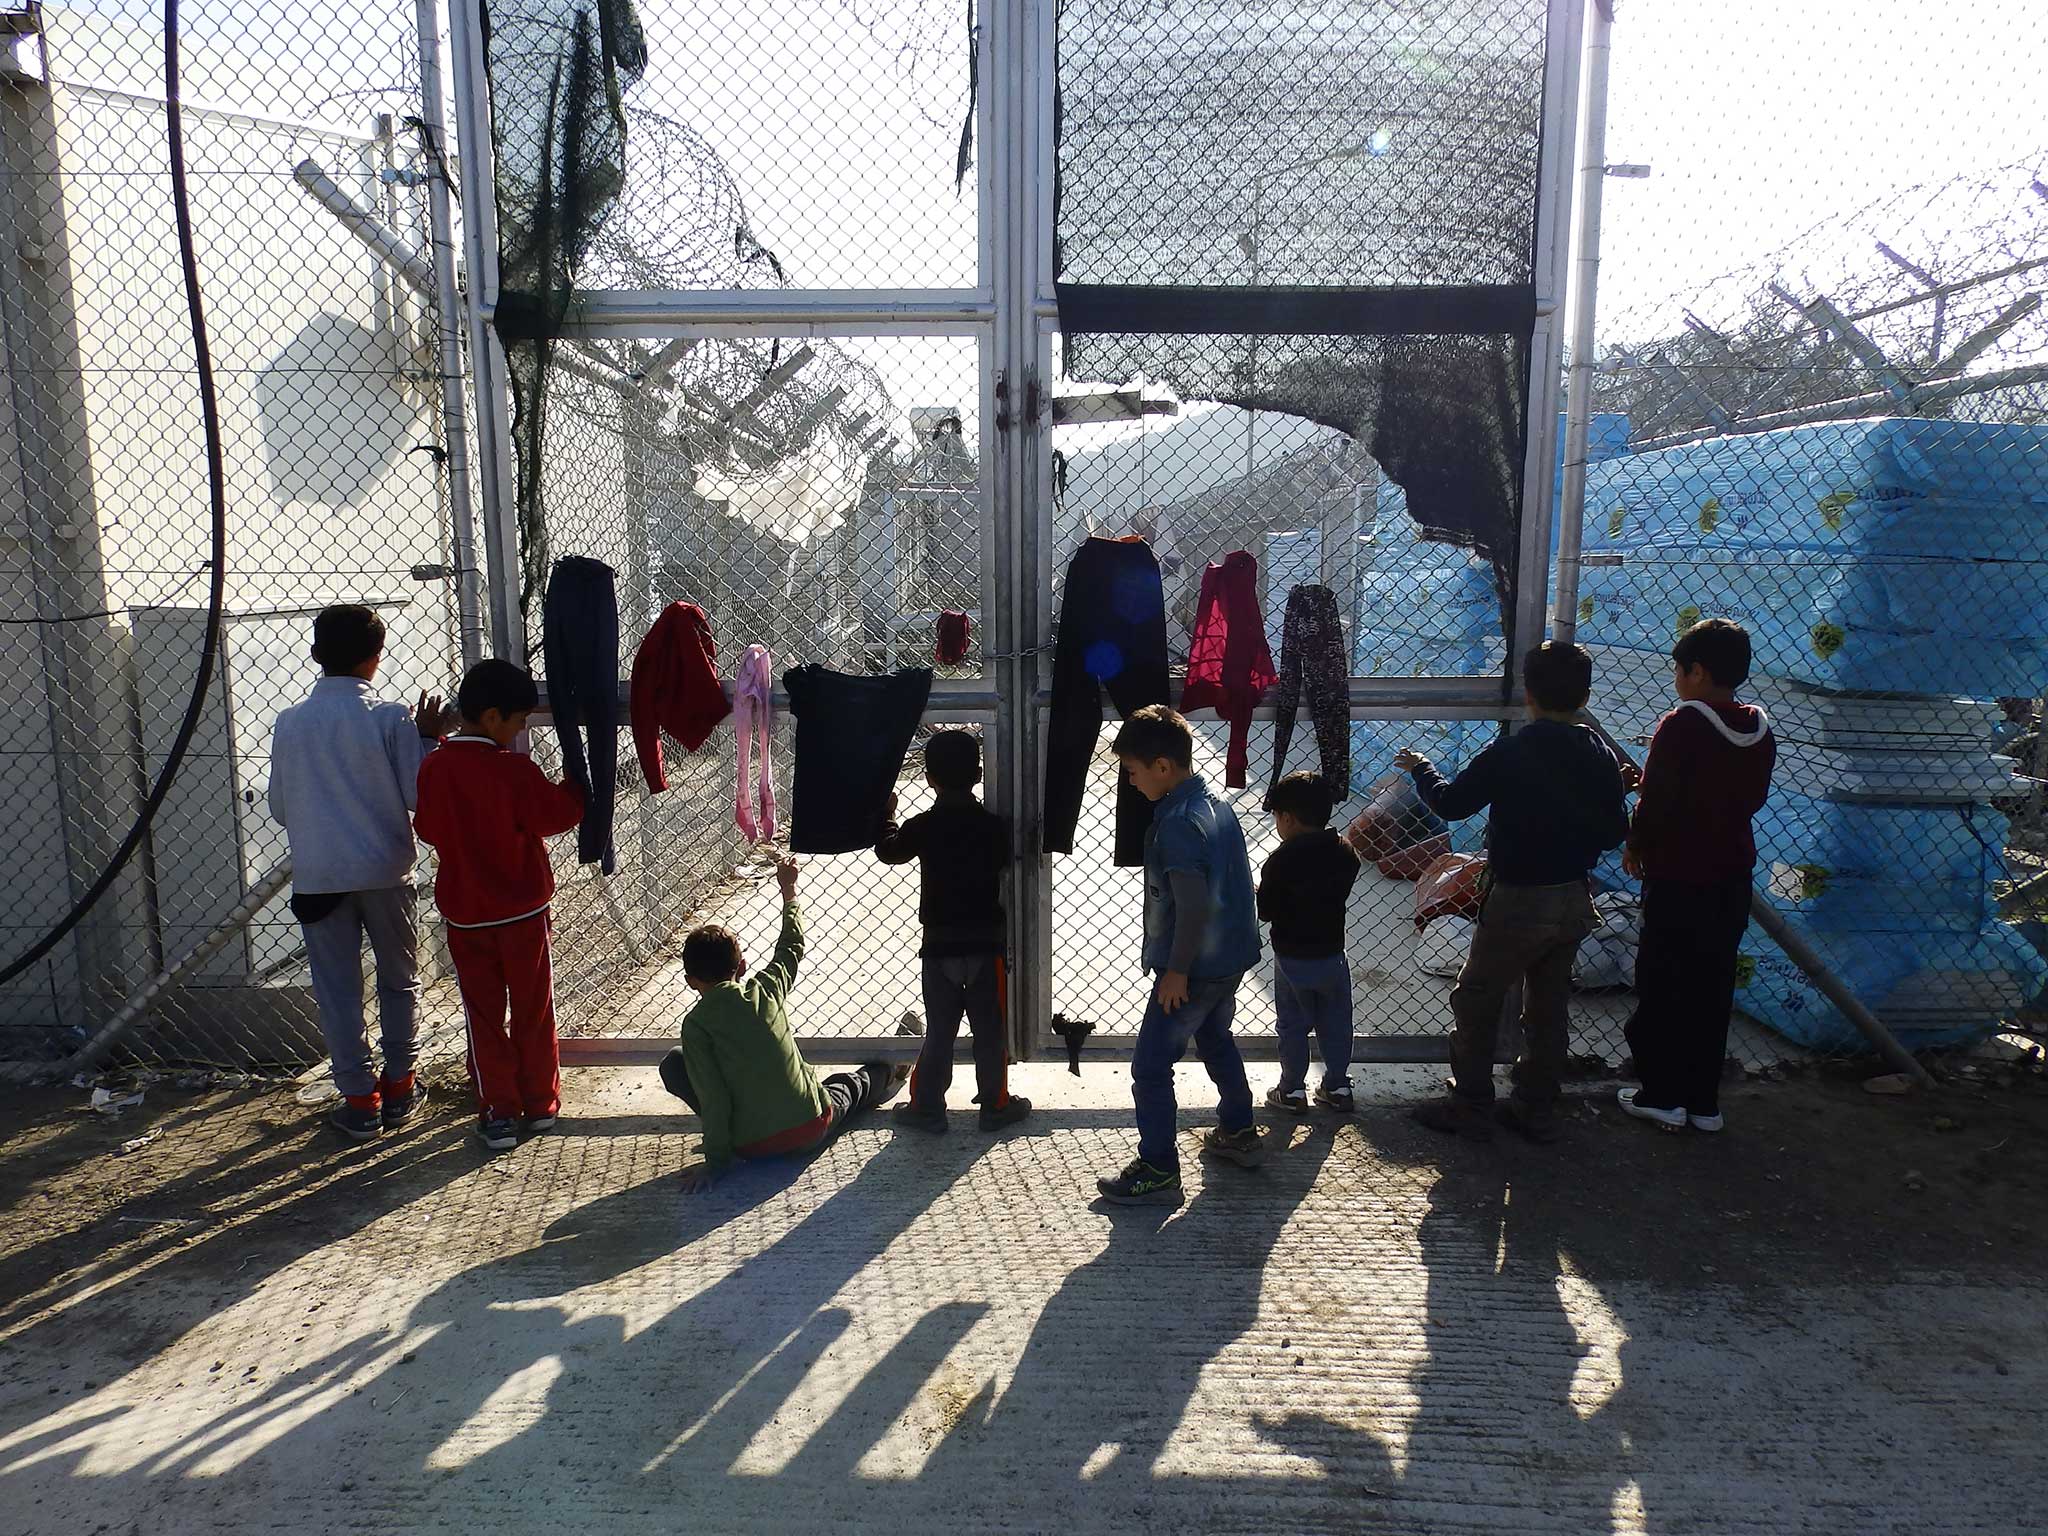 Refugee children at the Moria camp in Lesbos (Lizzie Dearden)